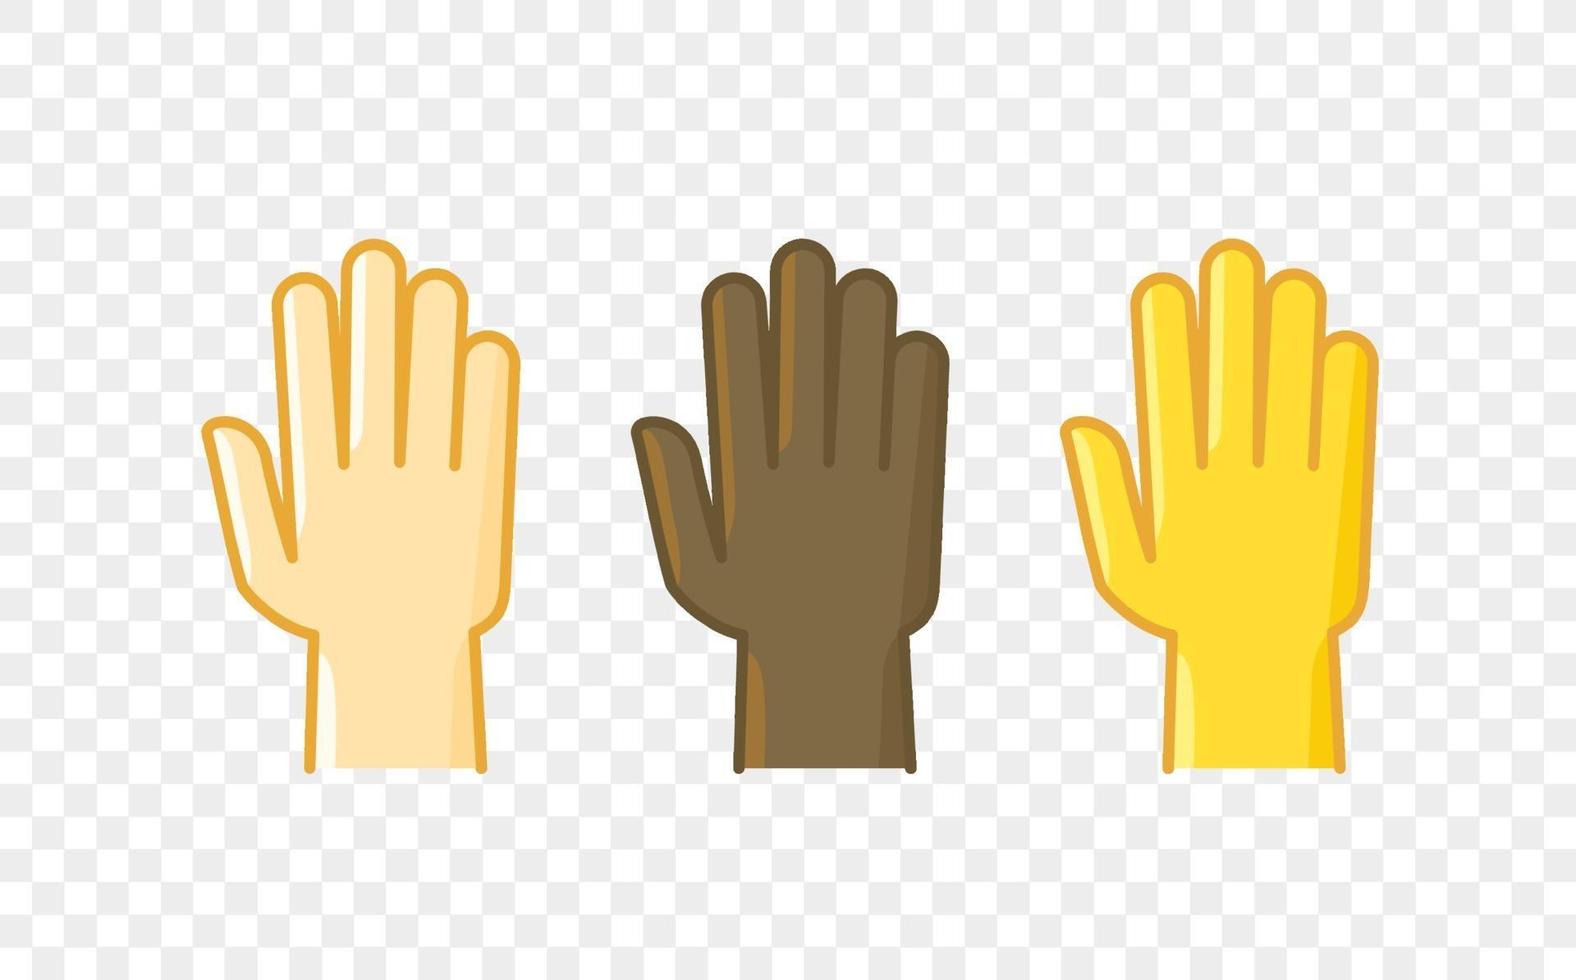 Different color hand gesture comic style vector icon. Palm